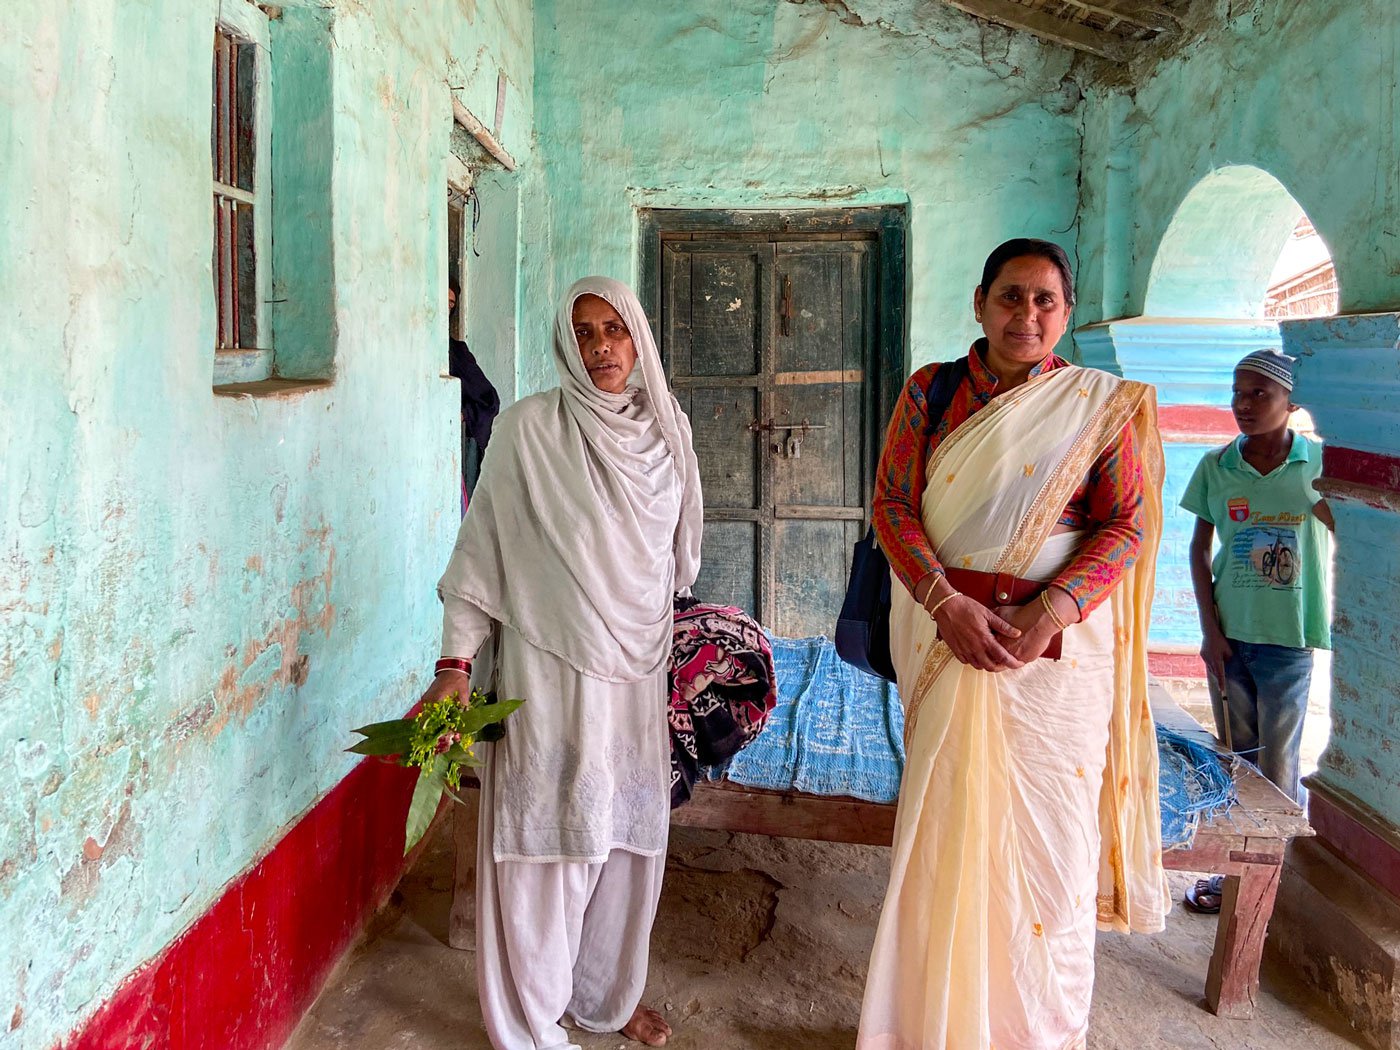 Salah with ANM Munni Kumari: She and Shama learnt how to administer injections along with a group of about 10 women trained by ANMs (auxiliary-nurse-midwives) from the nearby PHCs